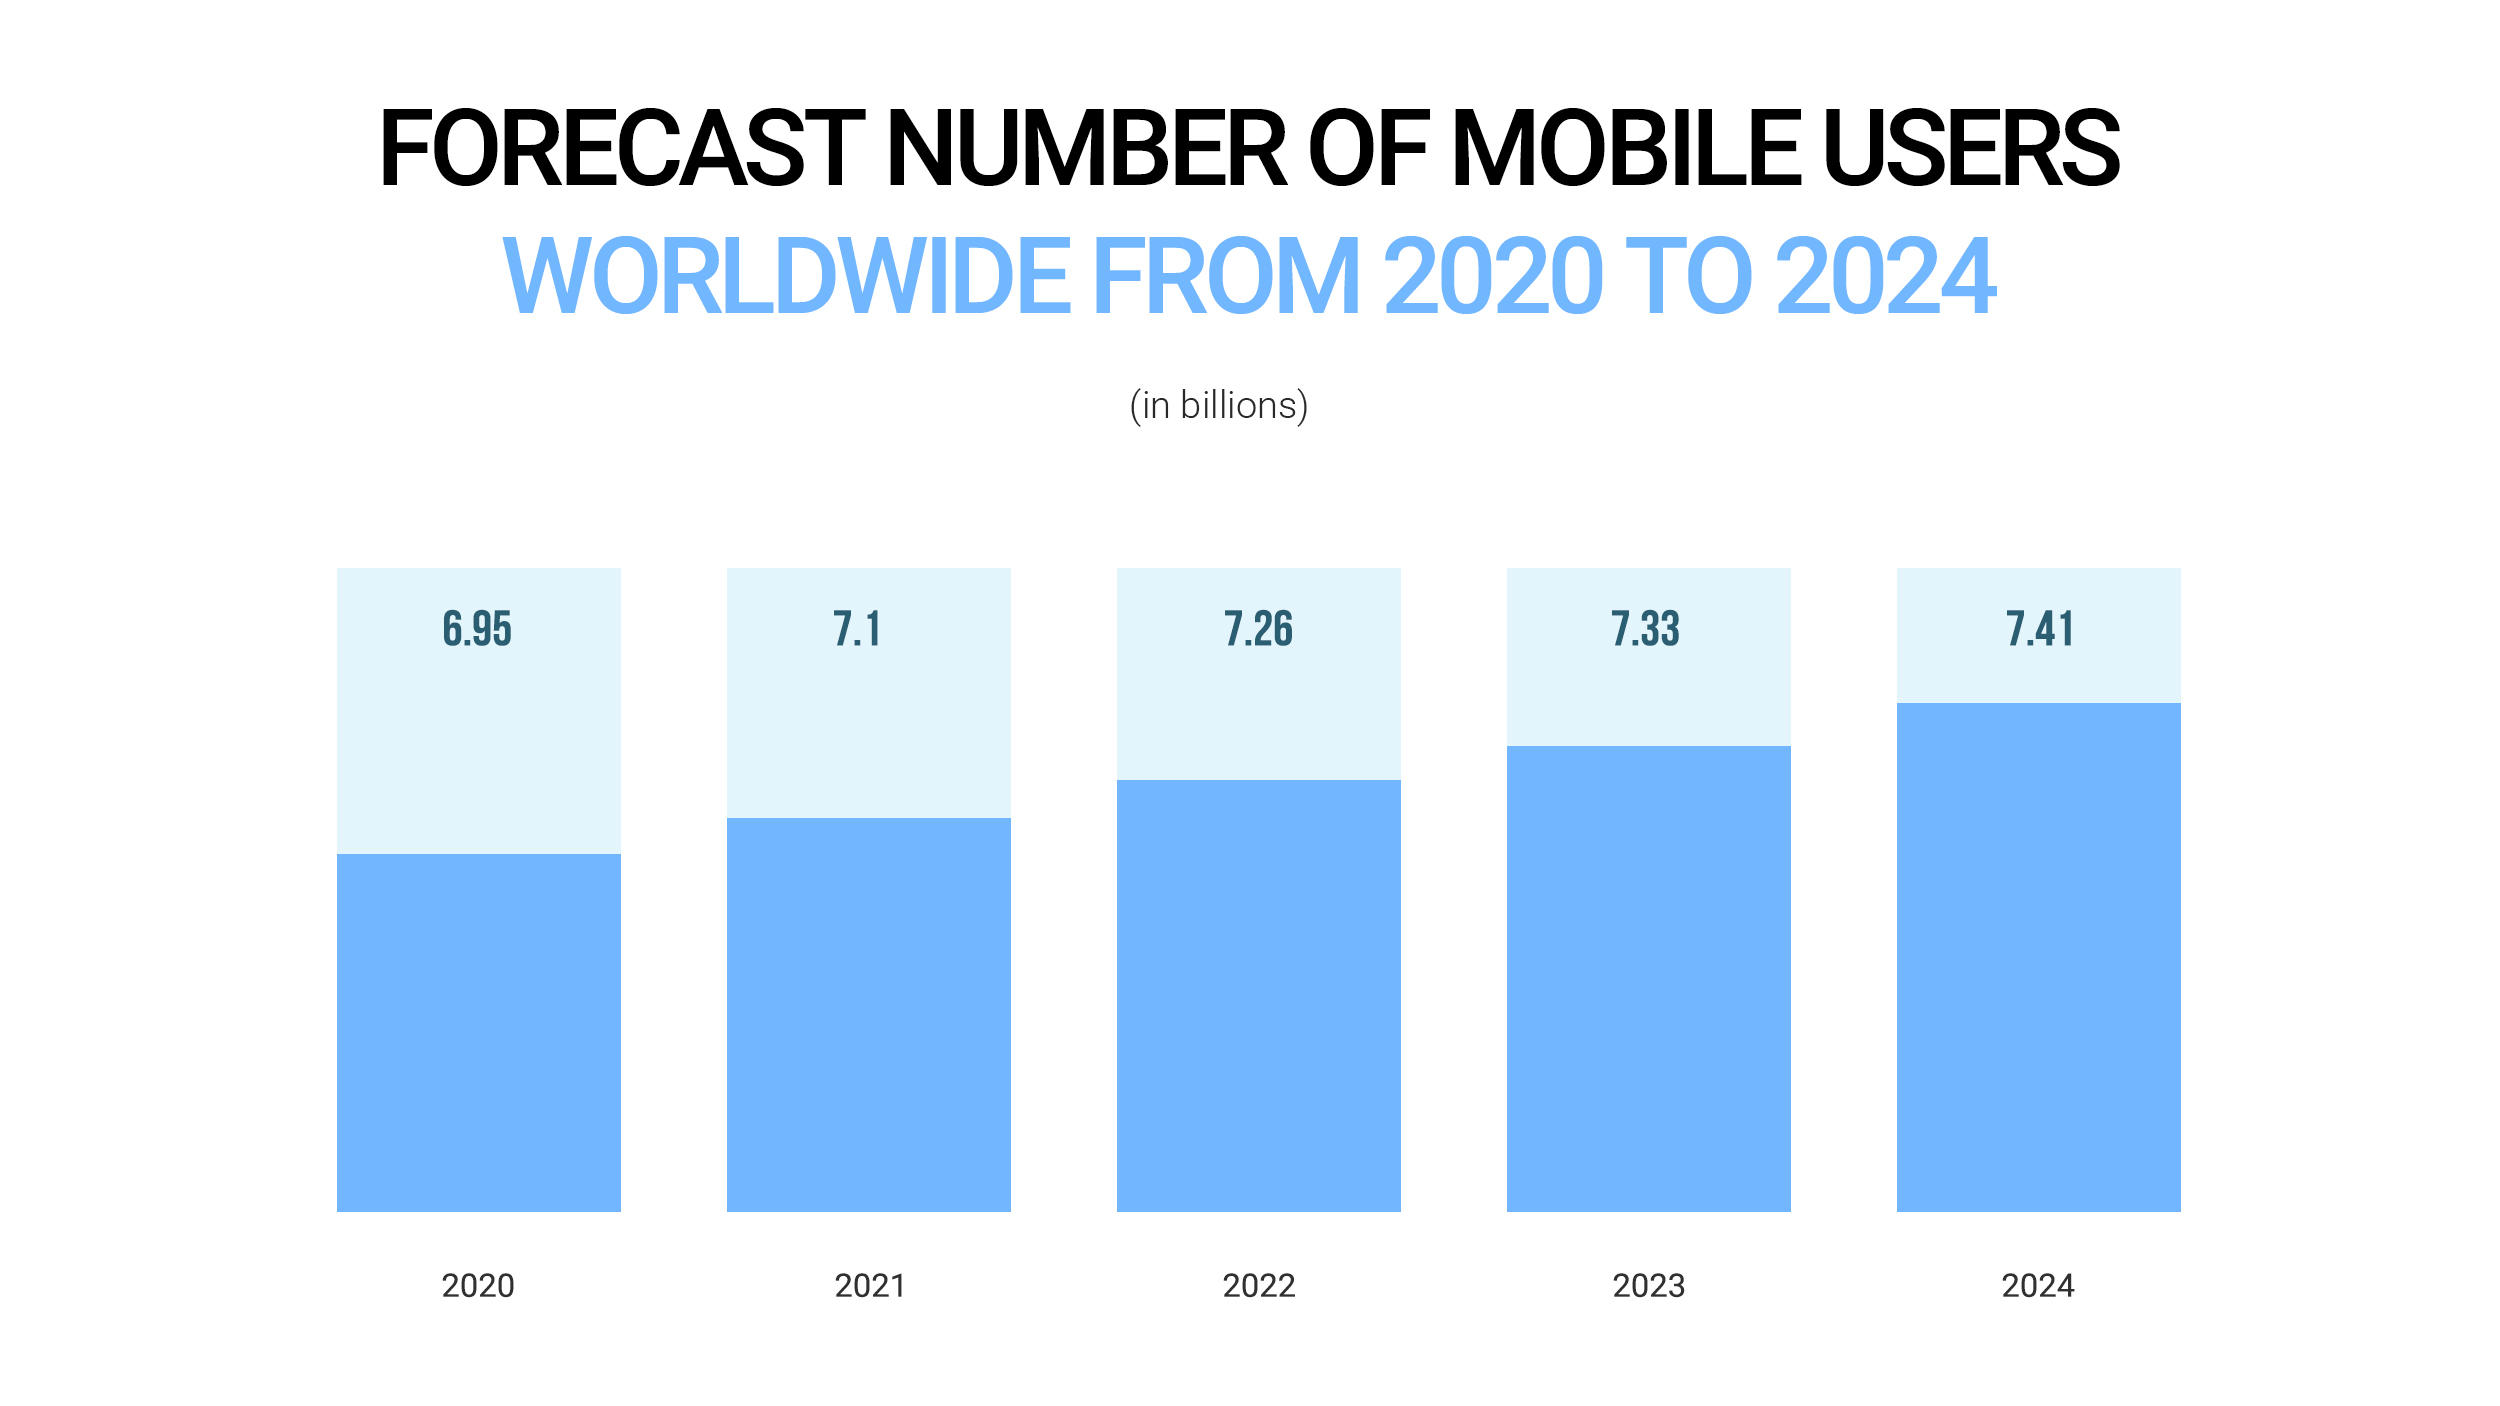 Forecast number of mobile users worldwide from 2020 to 2024